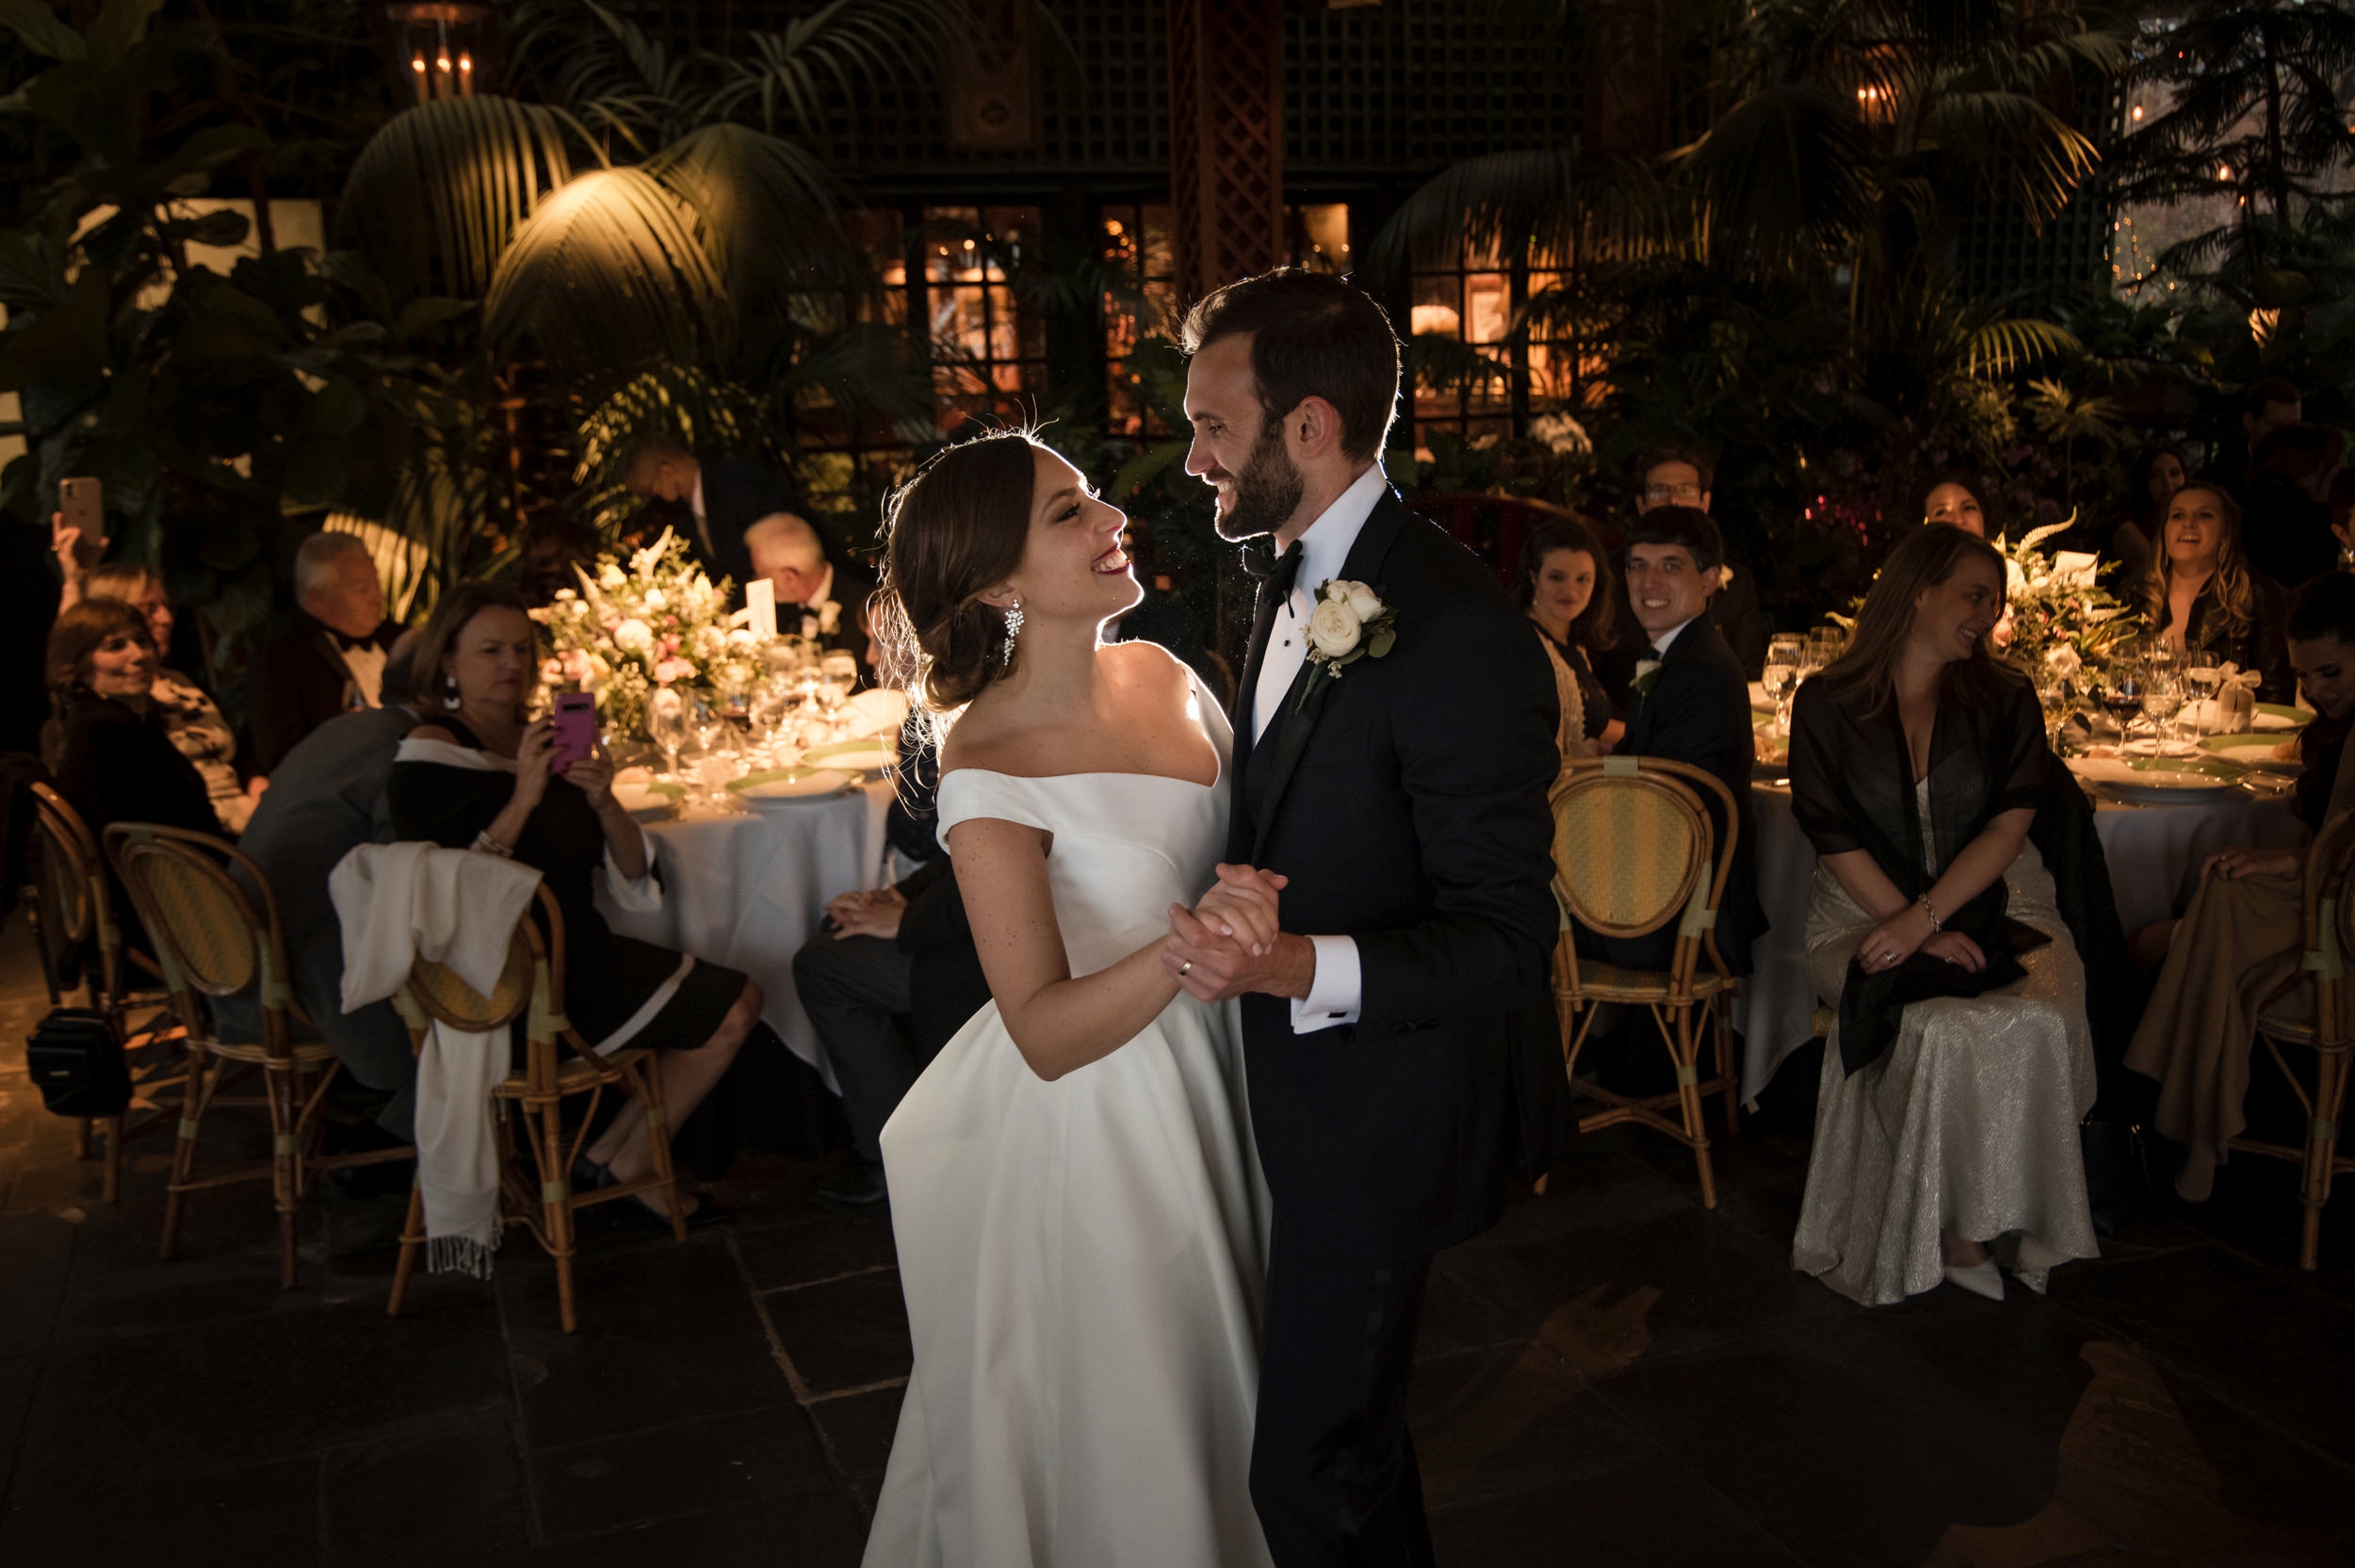 A bride and groom sharing their first dance at a River Cafe wedding reception